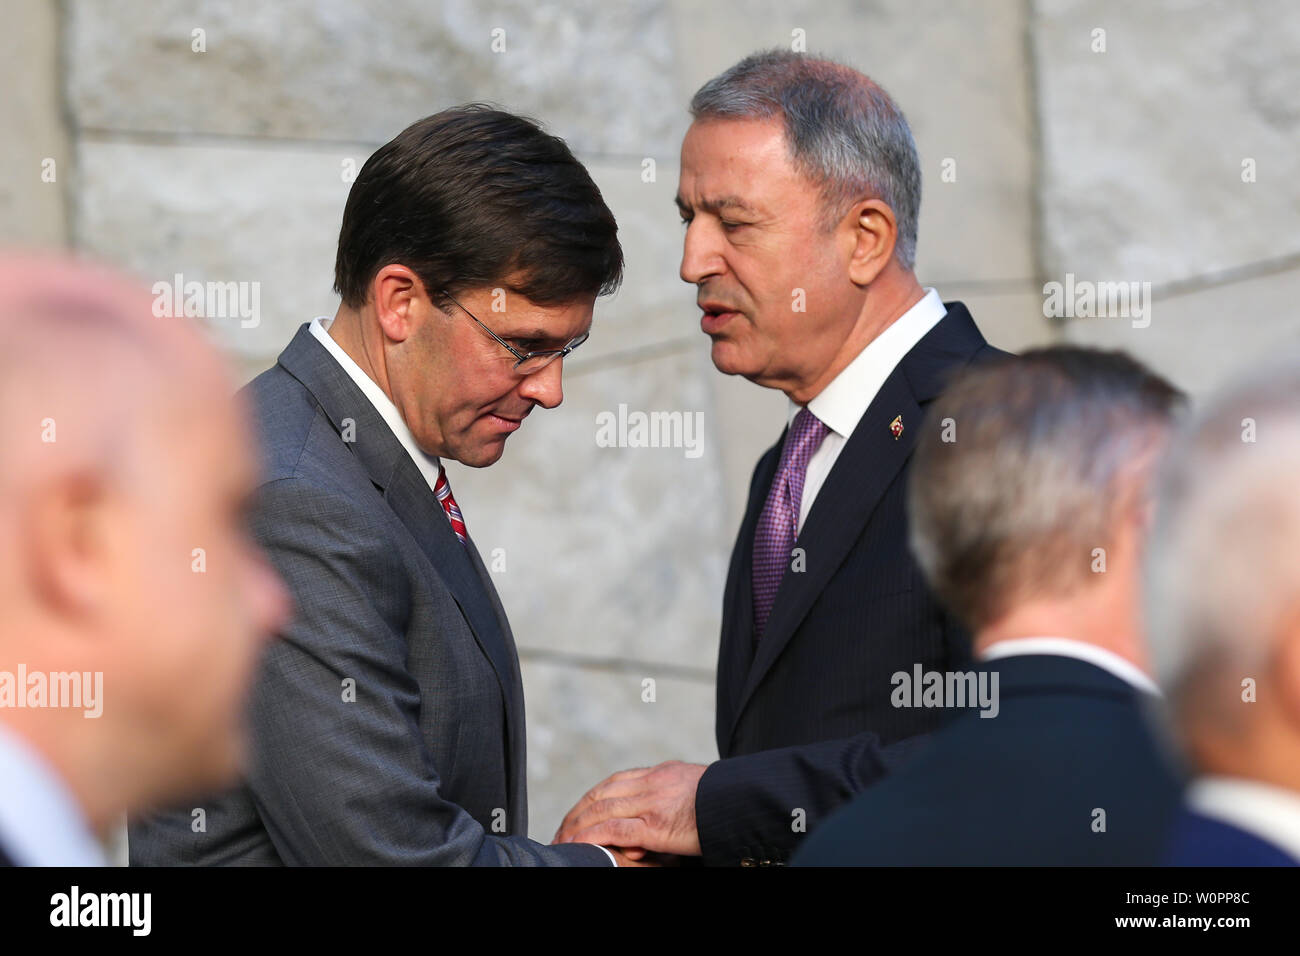 Brussels, Belgium. 27th June, 2019. U.S. Acting Secretary of Defense Mark Esper (L) chats with Turkish Defense Minister Hulusi Akar while attending a NATO defense ministers meeting at NATO headquarters in Brussels, Belgium, on June 27, 2019. The two-day NATO defense ministers meeting closed on Thursday. Credit: Zhang Cheng/Xinhua/Alamy Live News Stock Photo